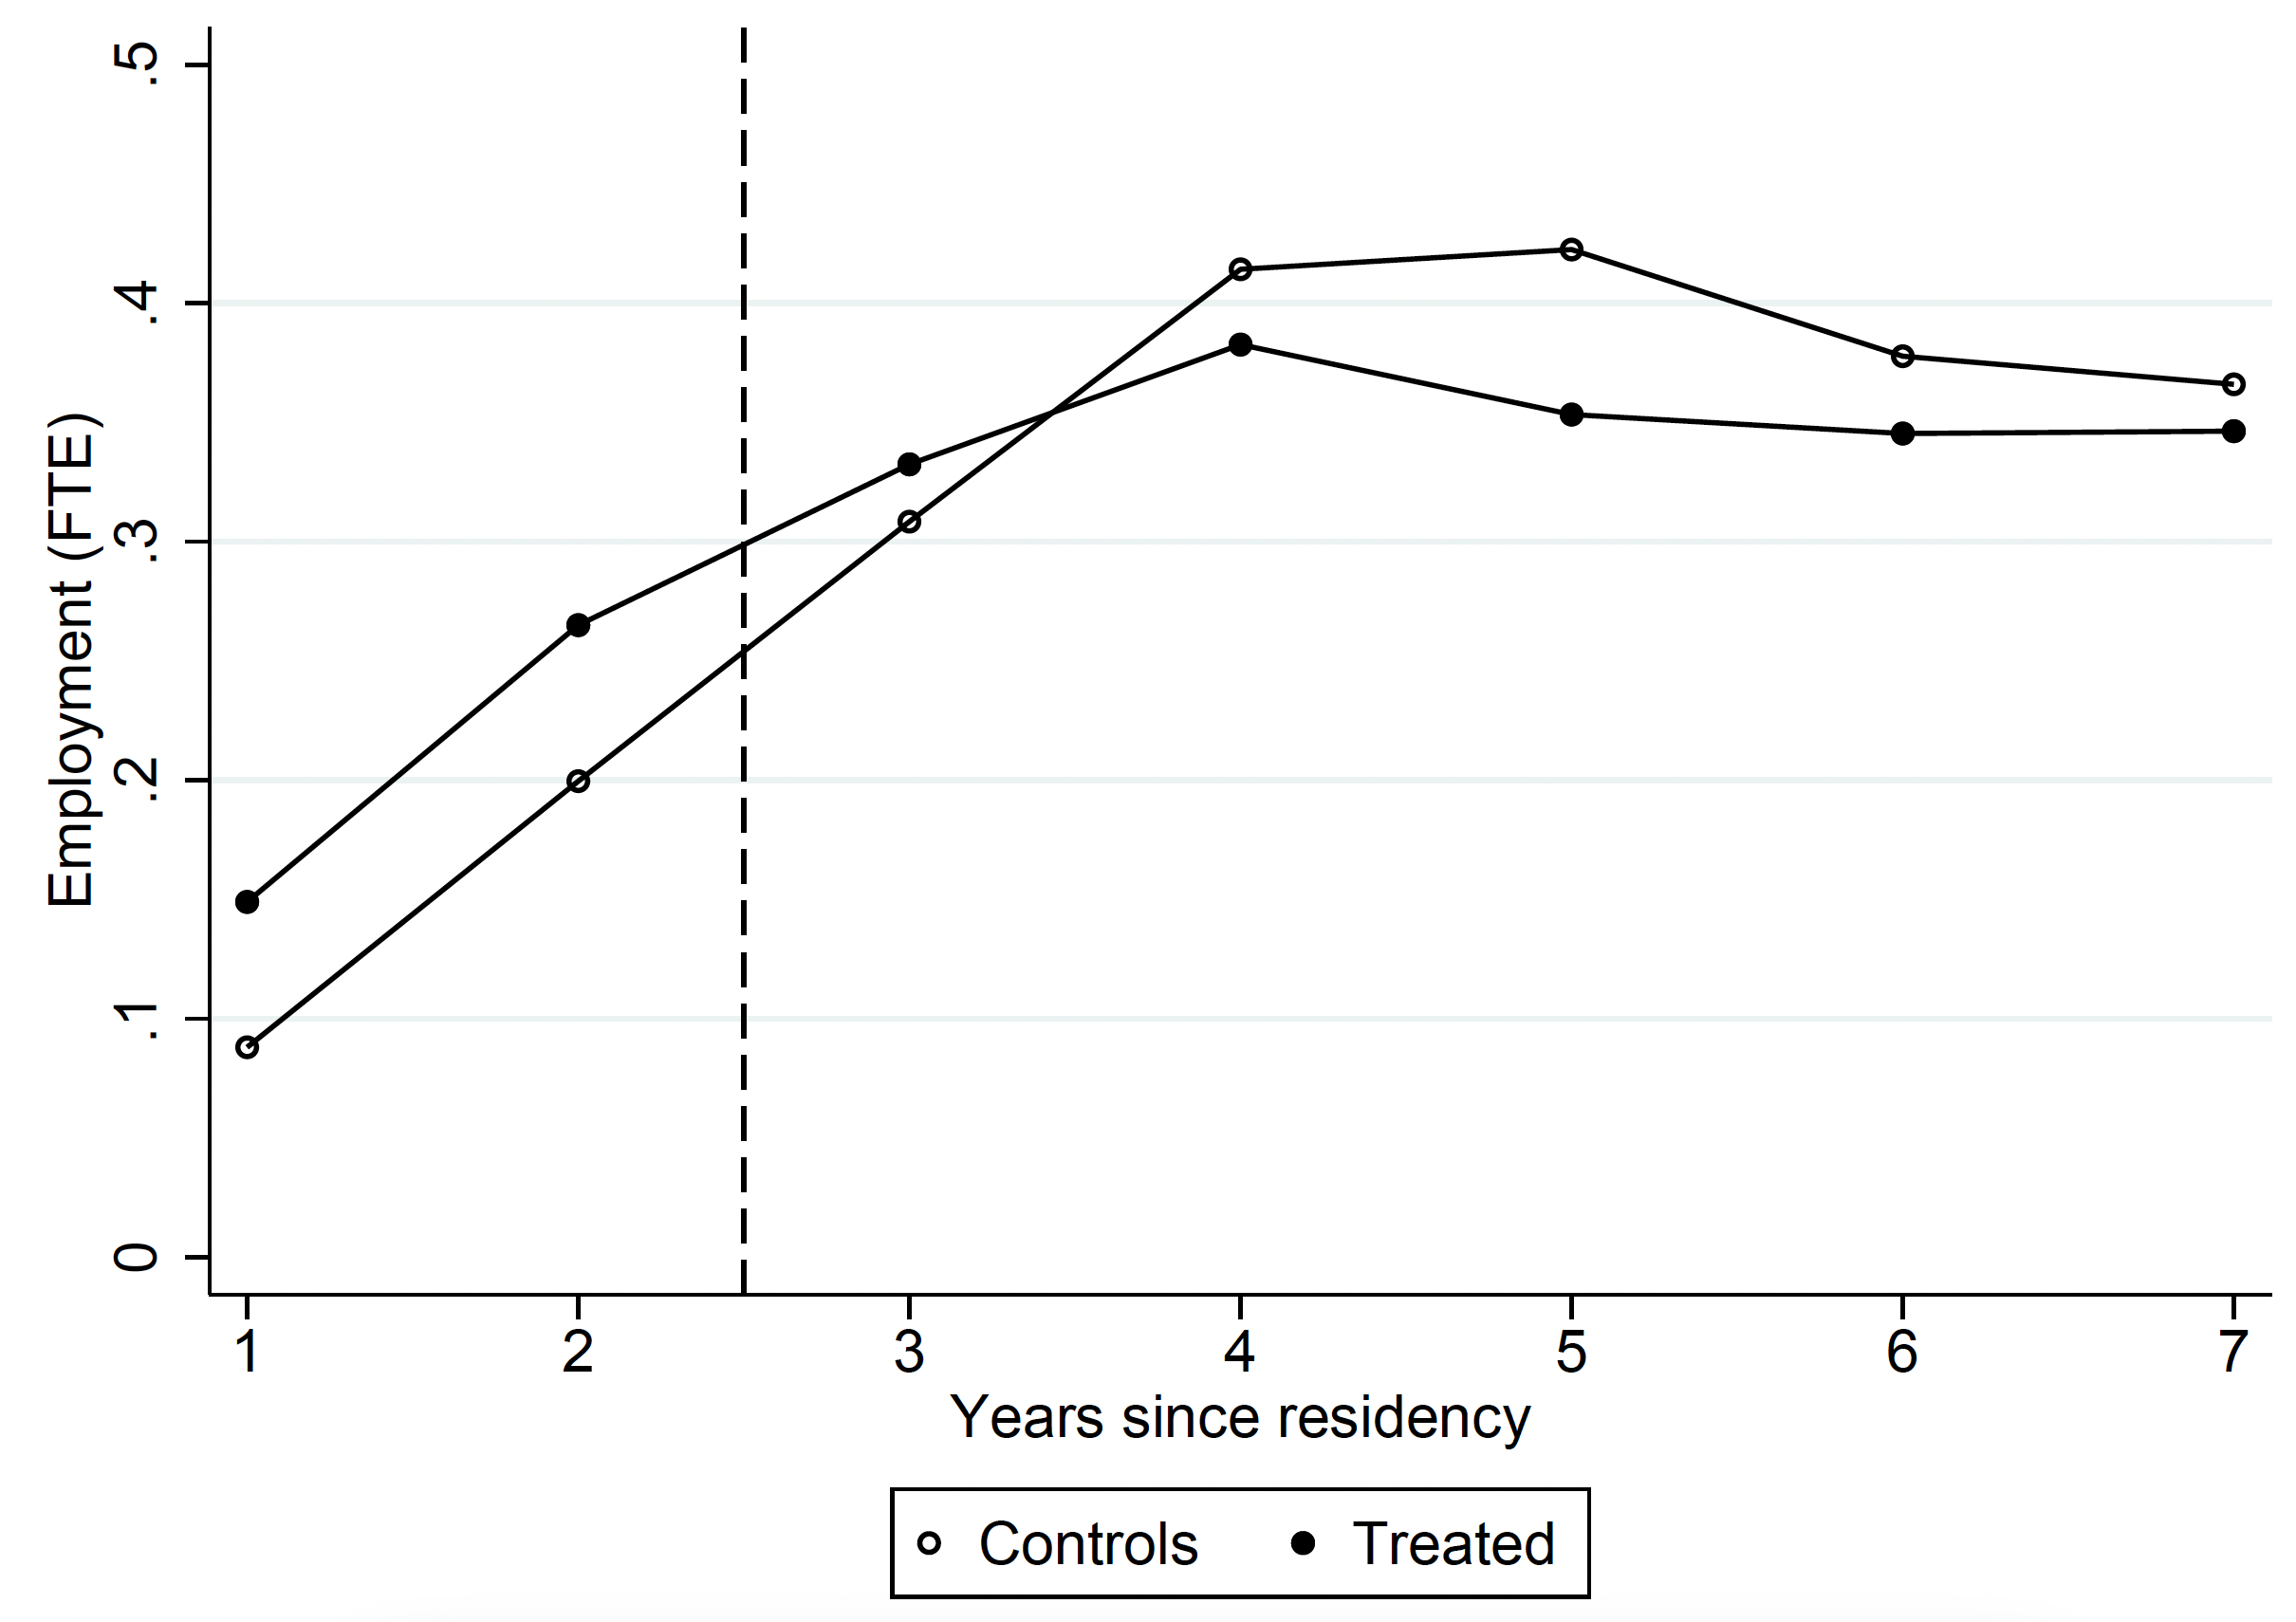 Figure 1 Employment trends for refugees in the treatment and control groups